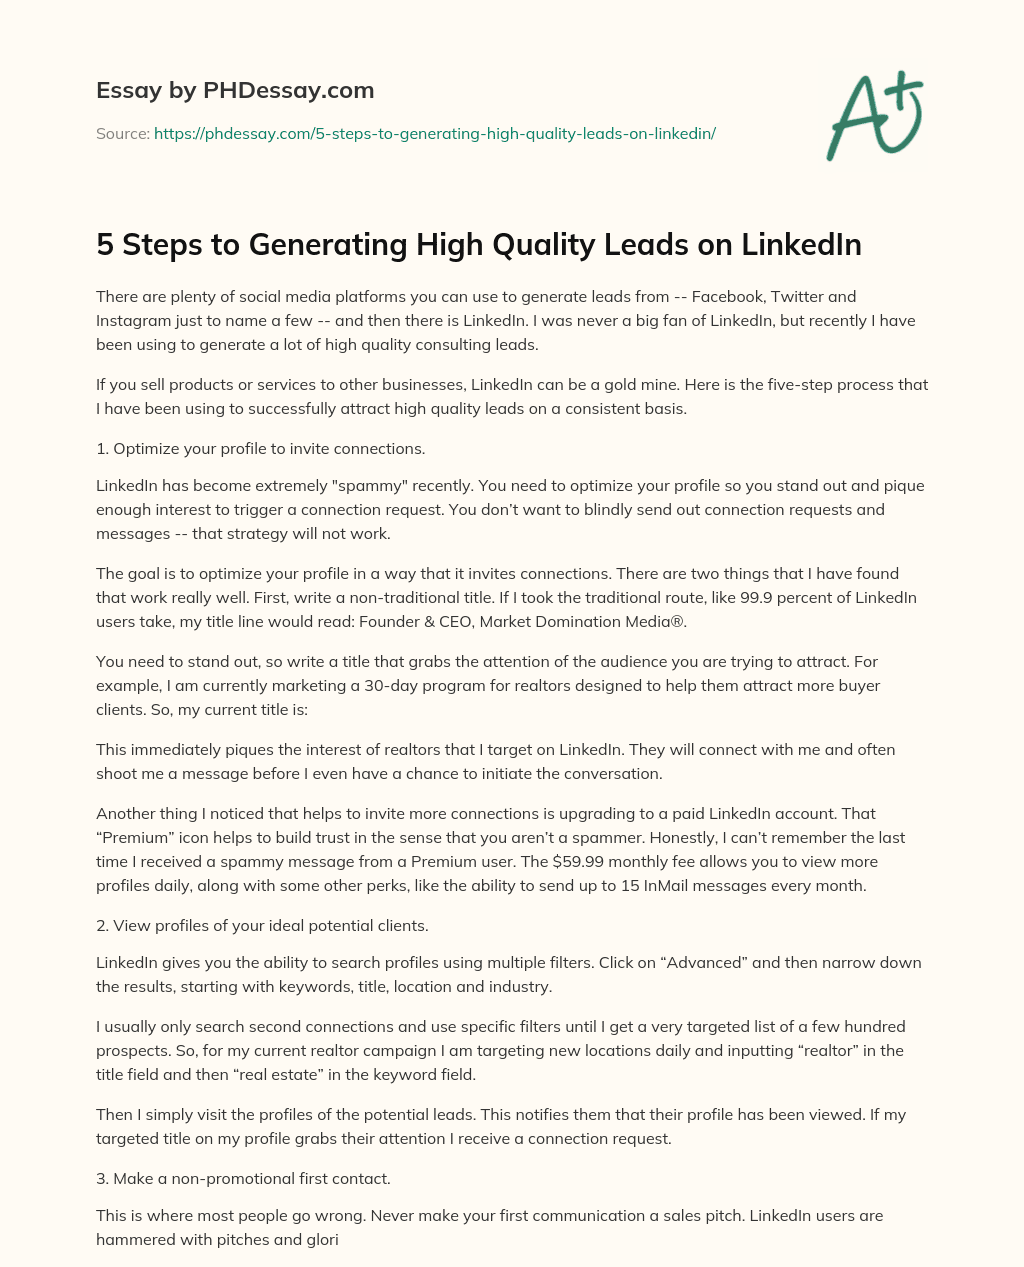 5 Steps to Generating High Quality Leads on LinkedIn essay